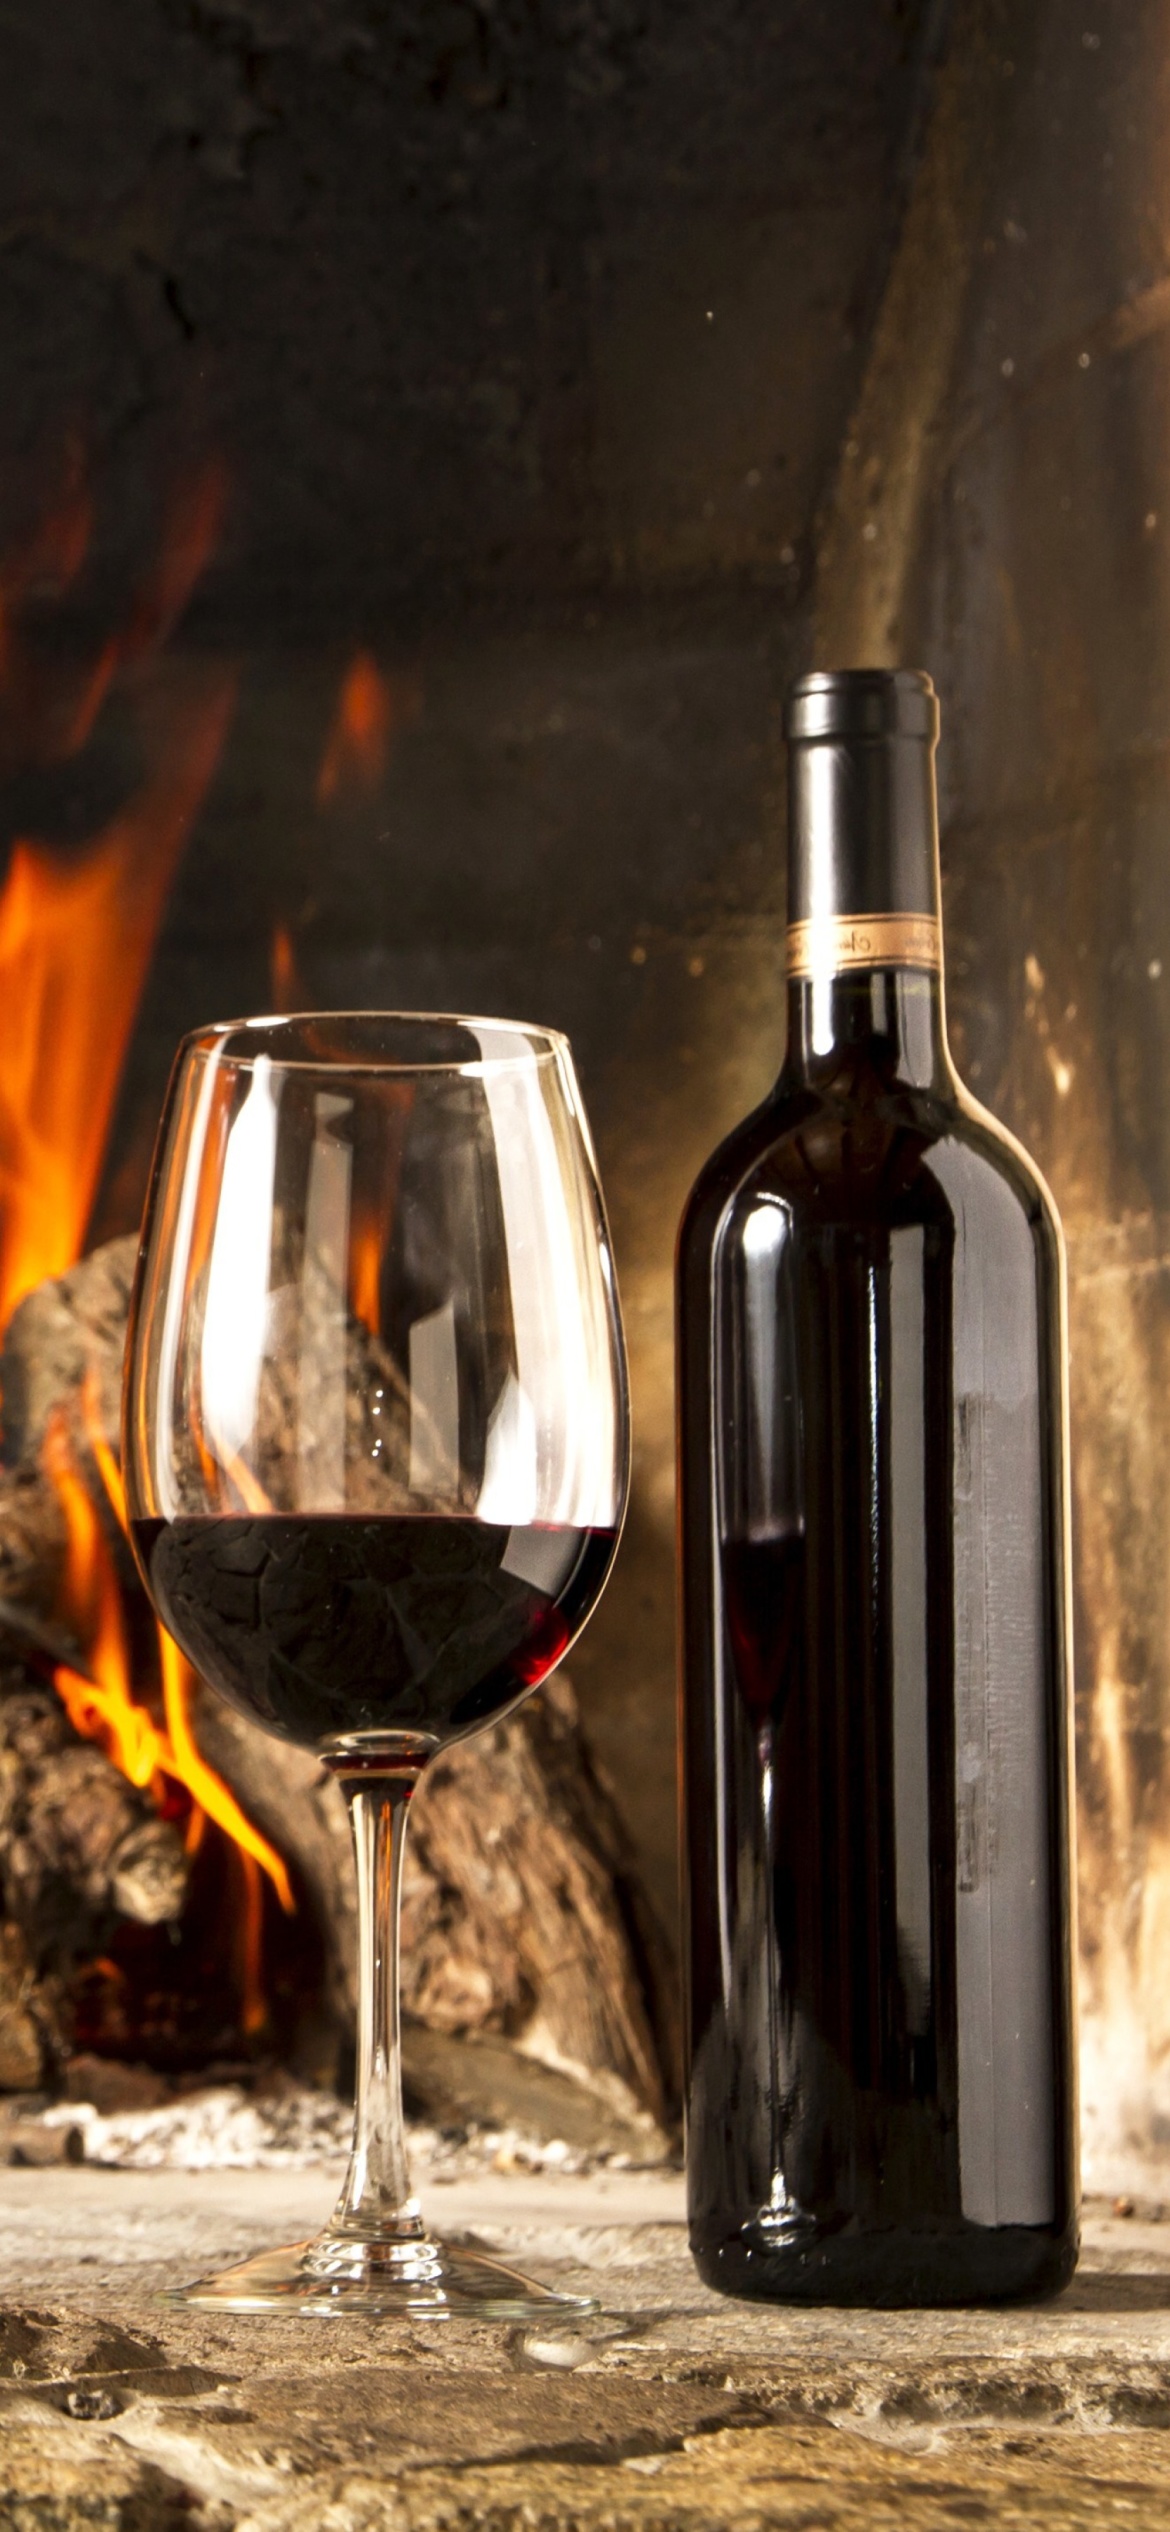 Wine and fireplace wallpaper 1170x2532